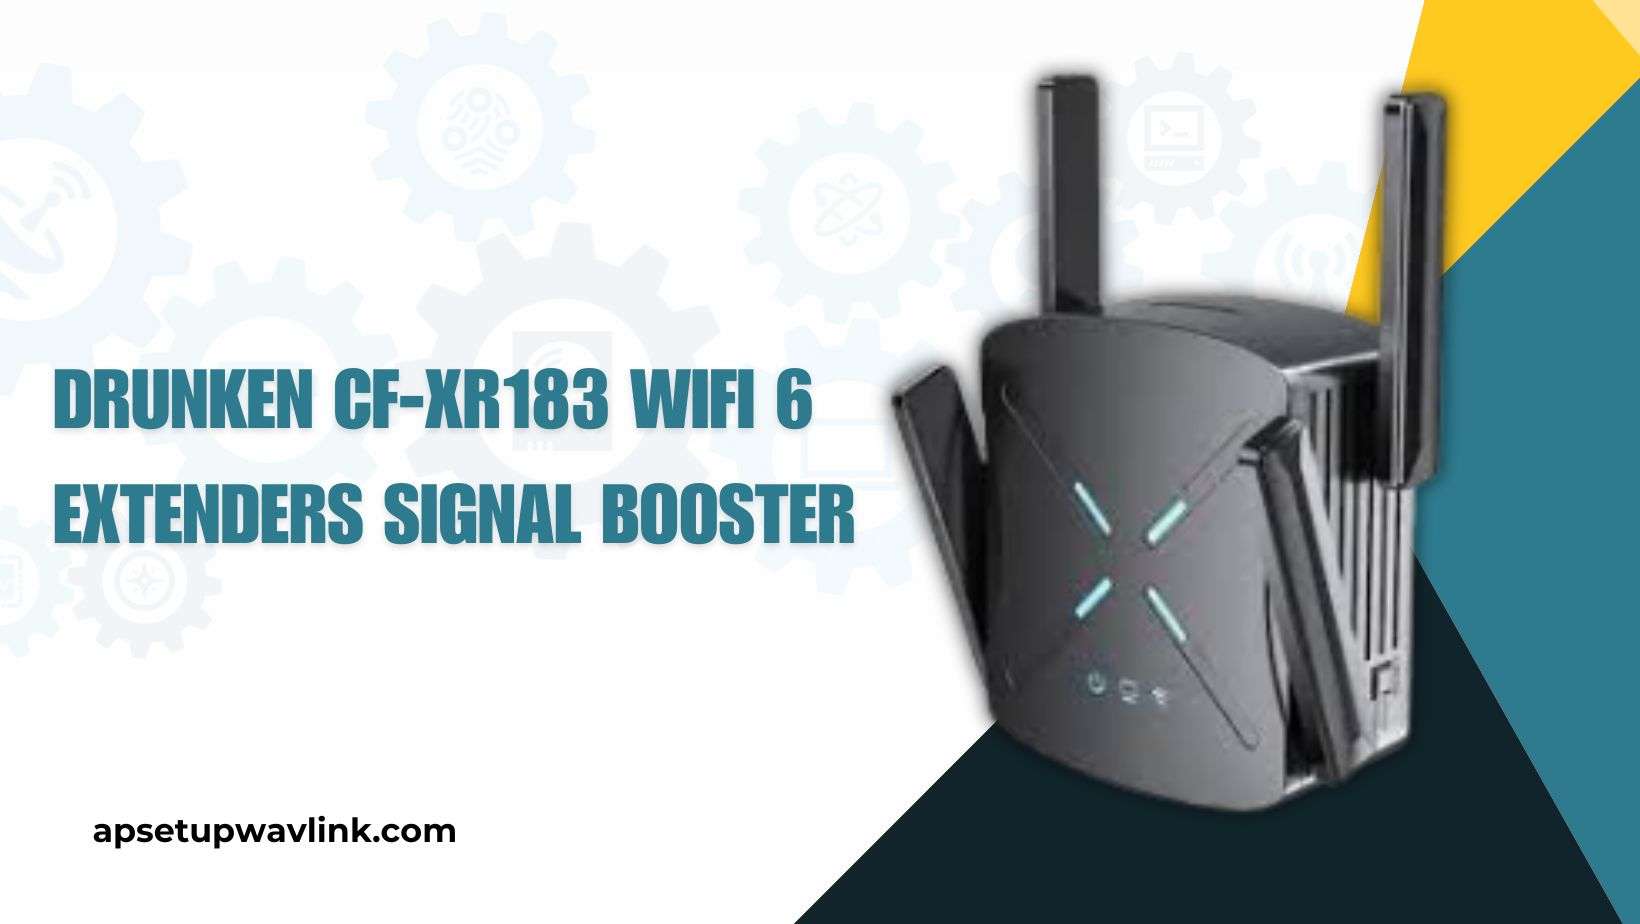 You are currently viewing Drunken CF-XR183 WiFi 6 Extenders Signal Booster 